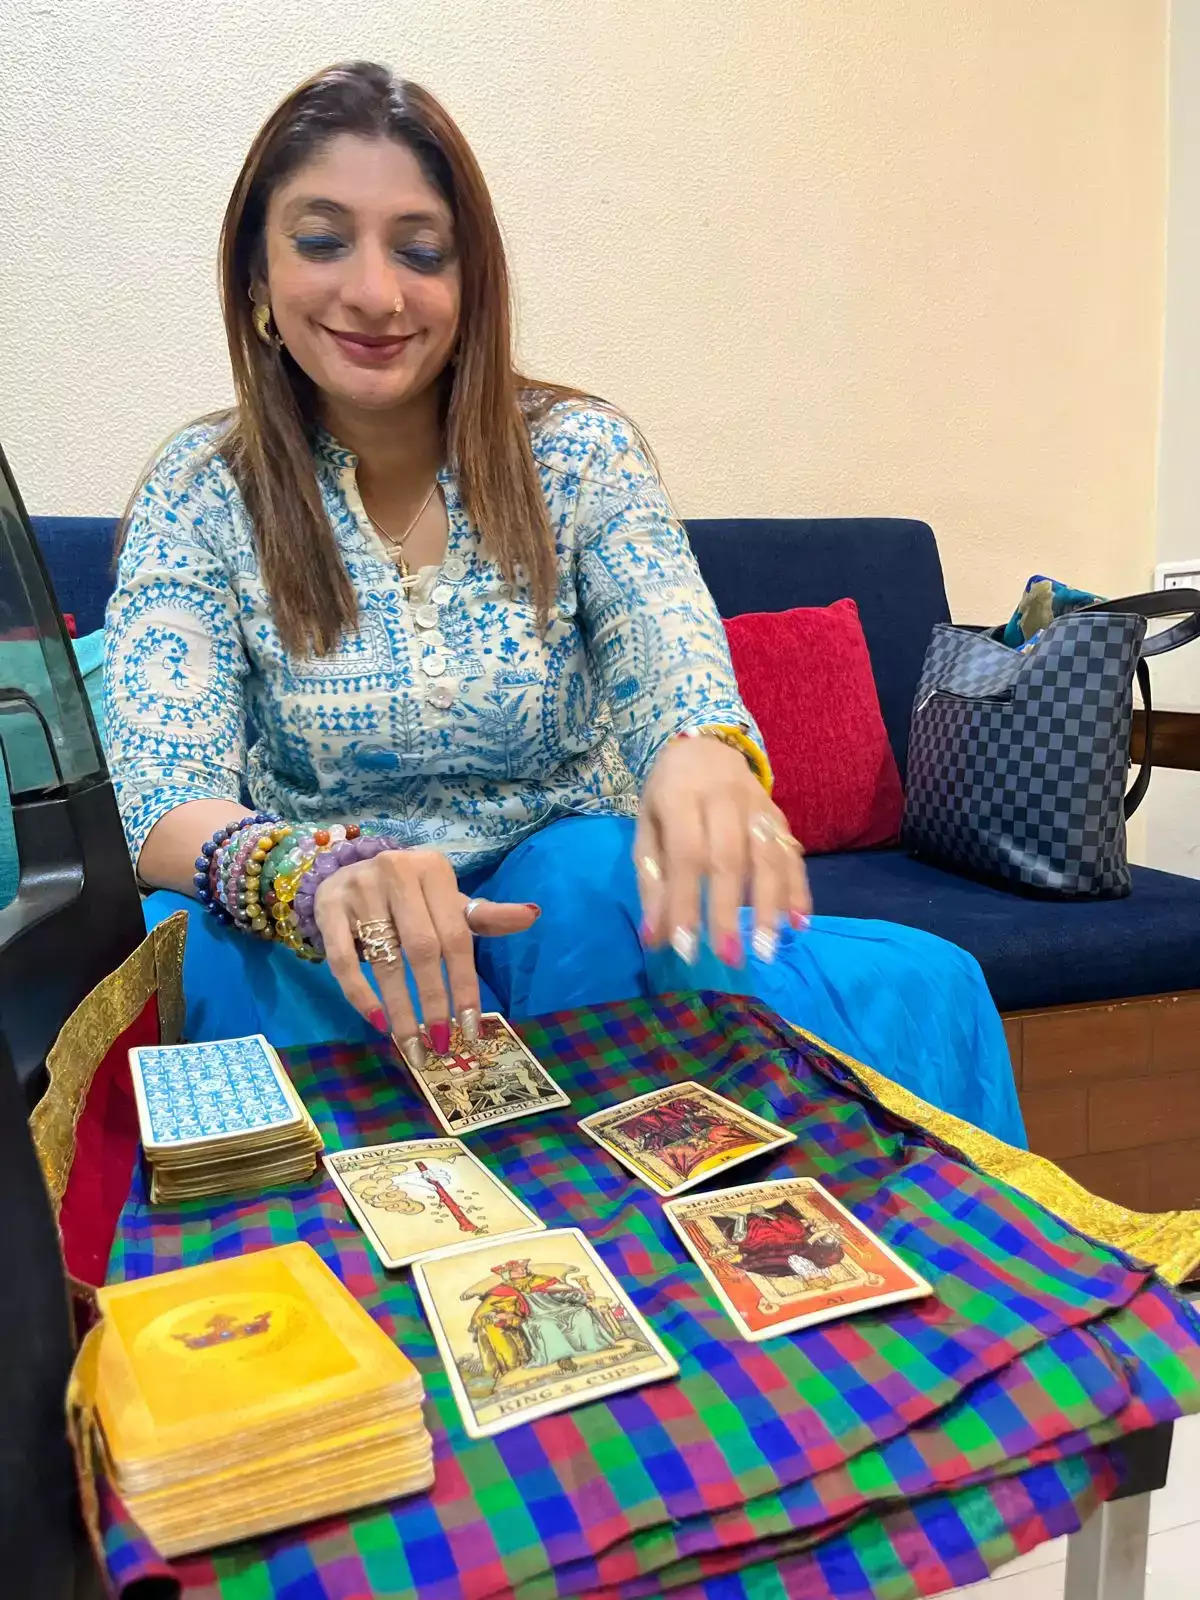 Jigna Vora shares her journey into the world of astrology and tarot card reading